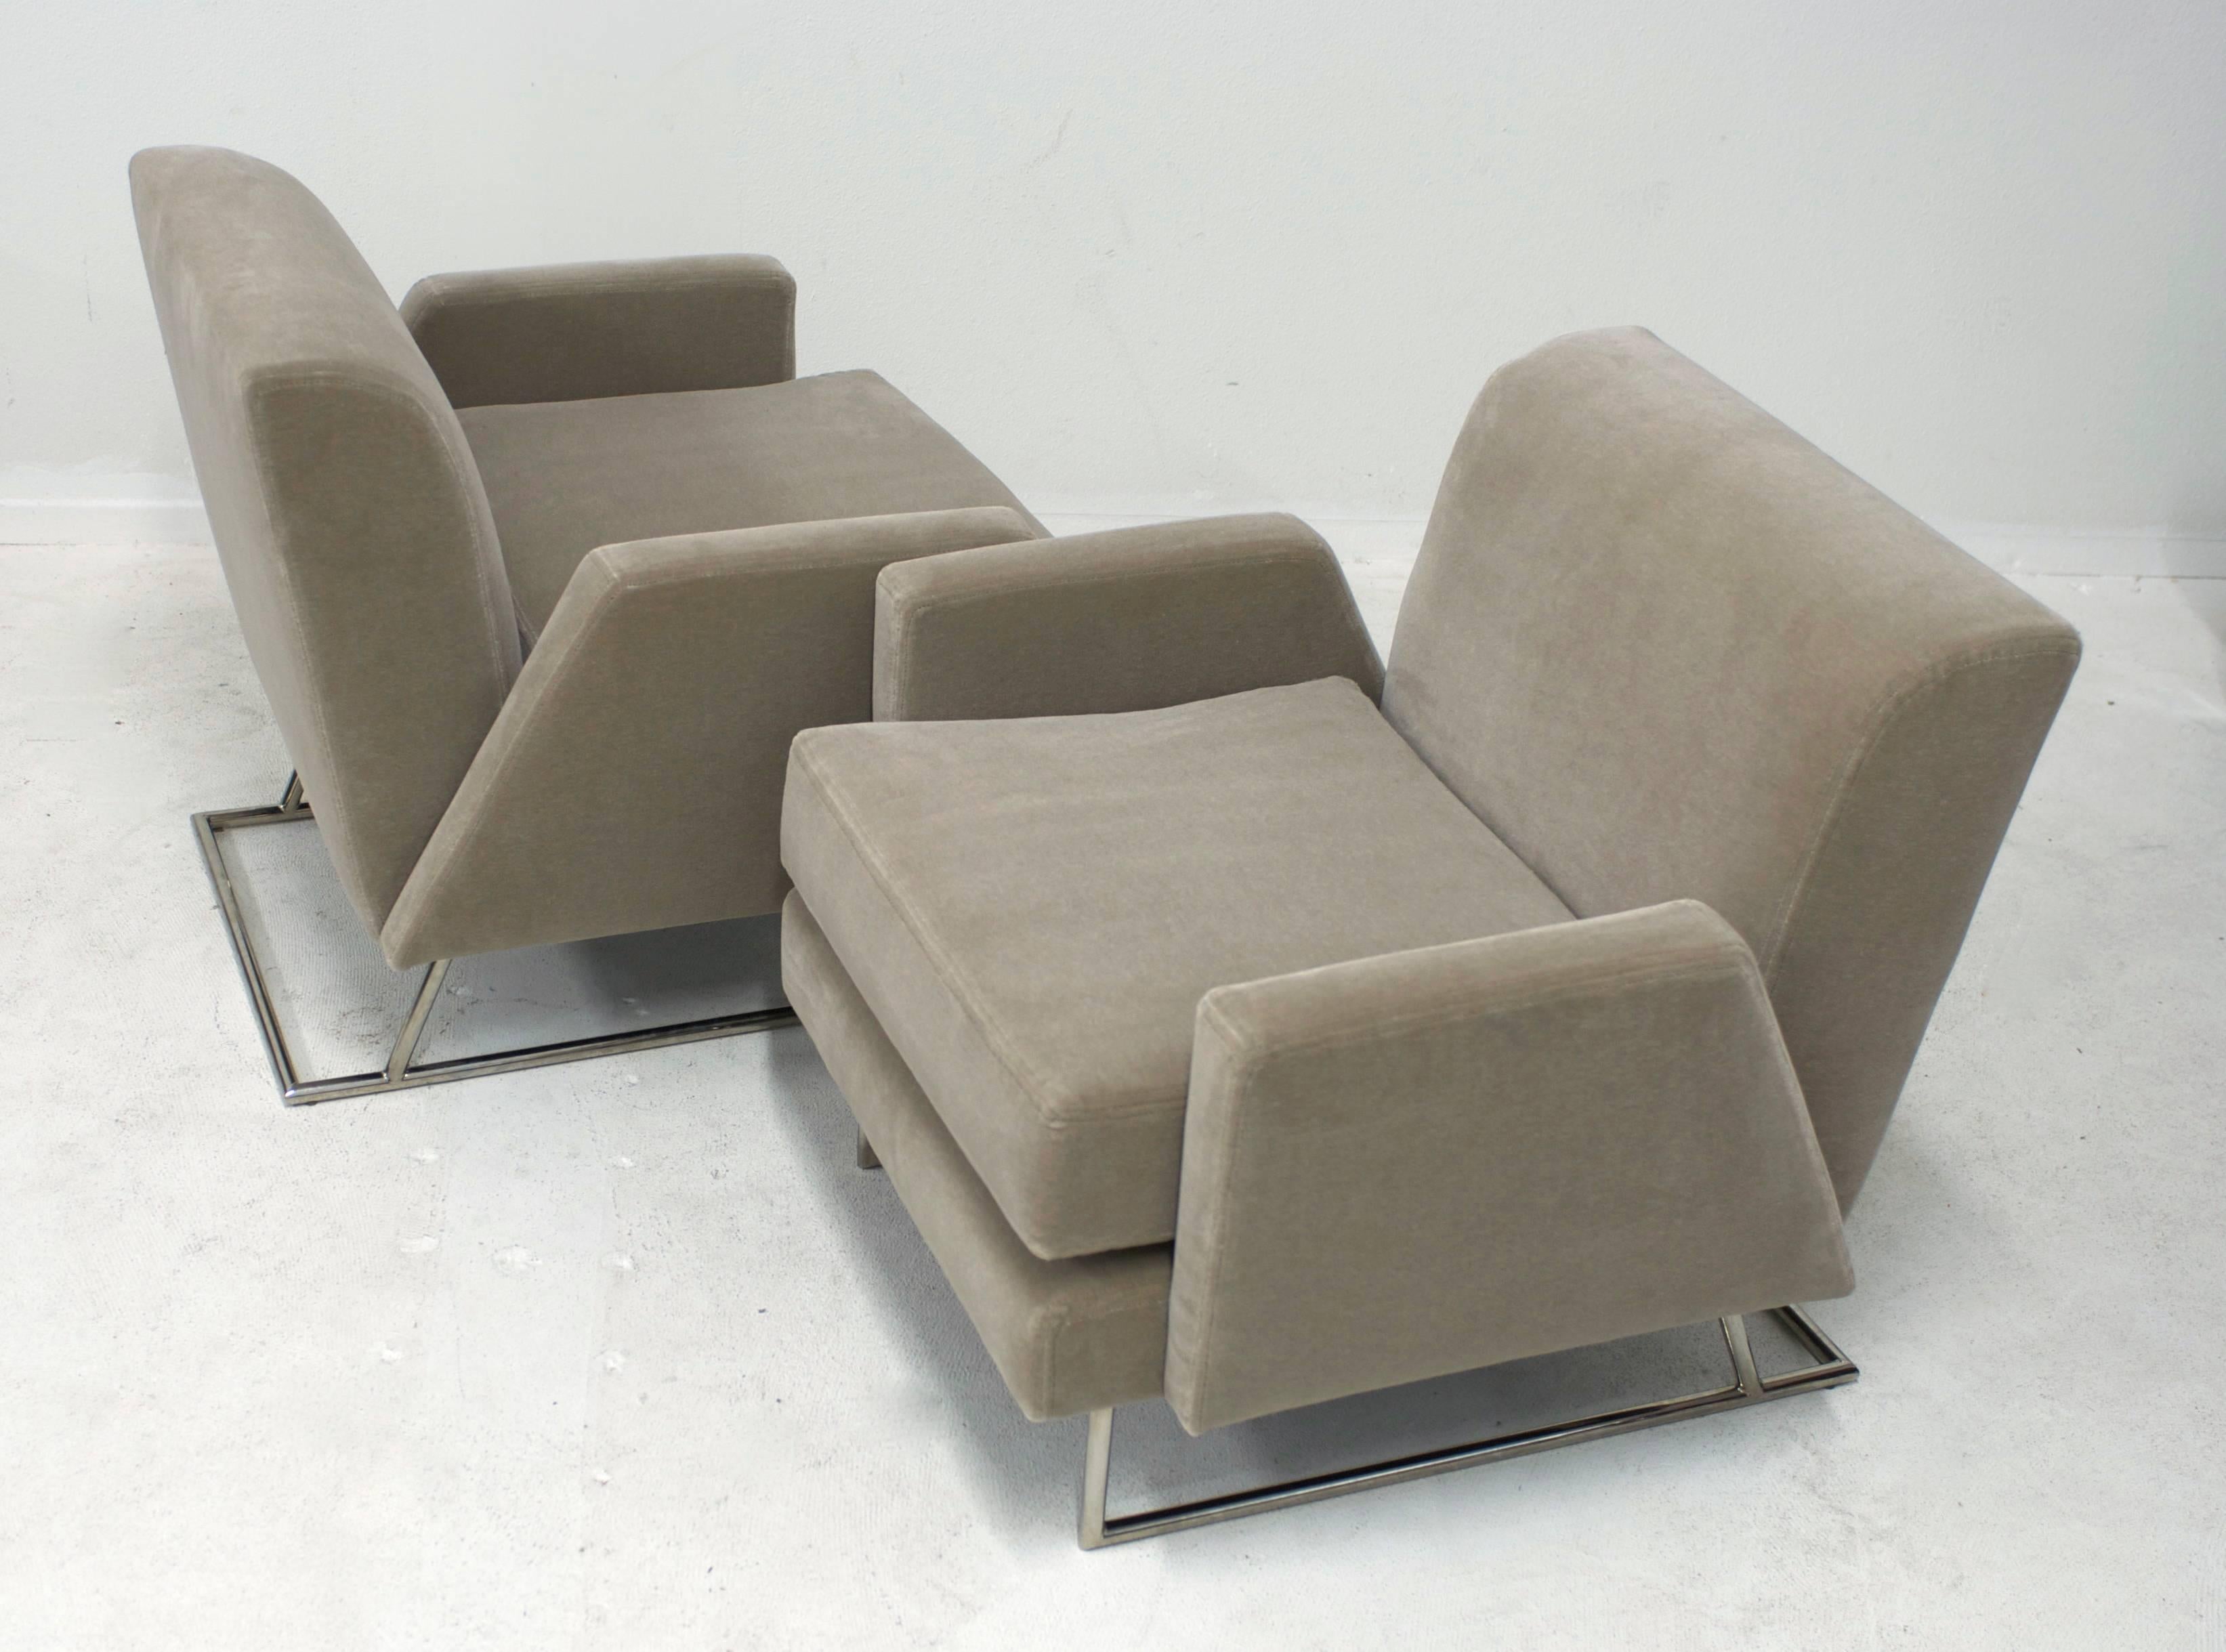 Pair of Lounge Chairs in Mohair with Thin Polished Steel Base 1